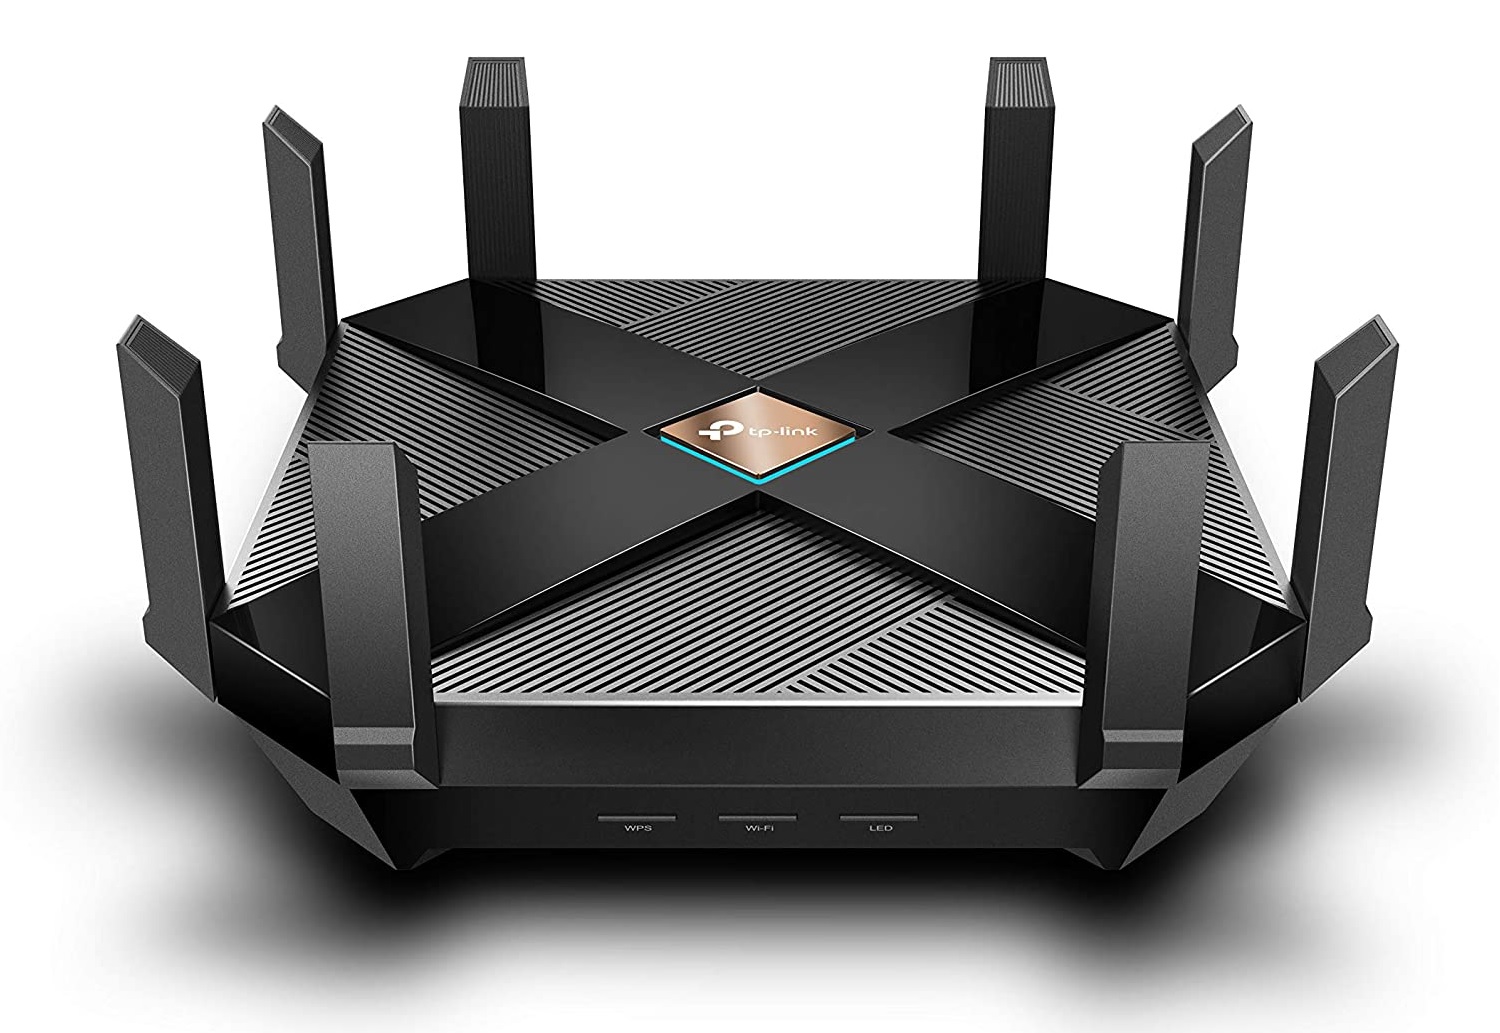 Router Inalámbrico 5952 Mbps – TP-Link Archer AX6000 / Wi-fi 6 | 2110 - Router Inalámbrico, Wi-Fi 6, Bandas: 5 GHz y 2.4 Hz, 8 antenas, 4×4 MU-MIMO, Velocidades: 4804 Mbps y 1148 Mbps, Modos: Router y Punto de Acceso, 1x WAN, 8x LAN Gigabit, USB 